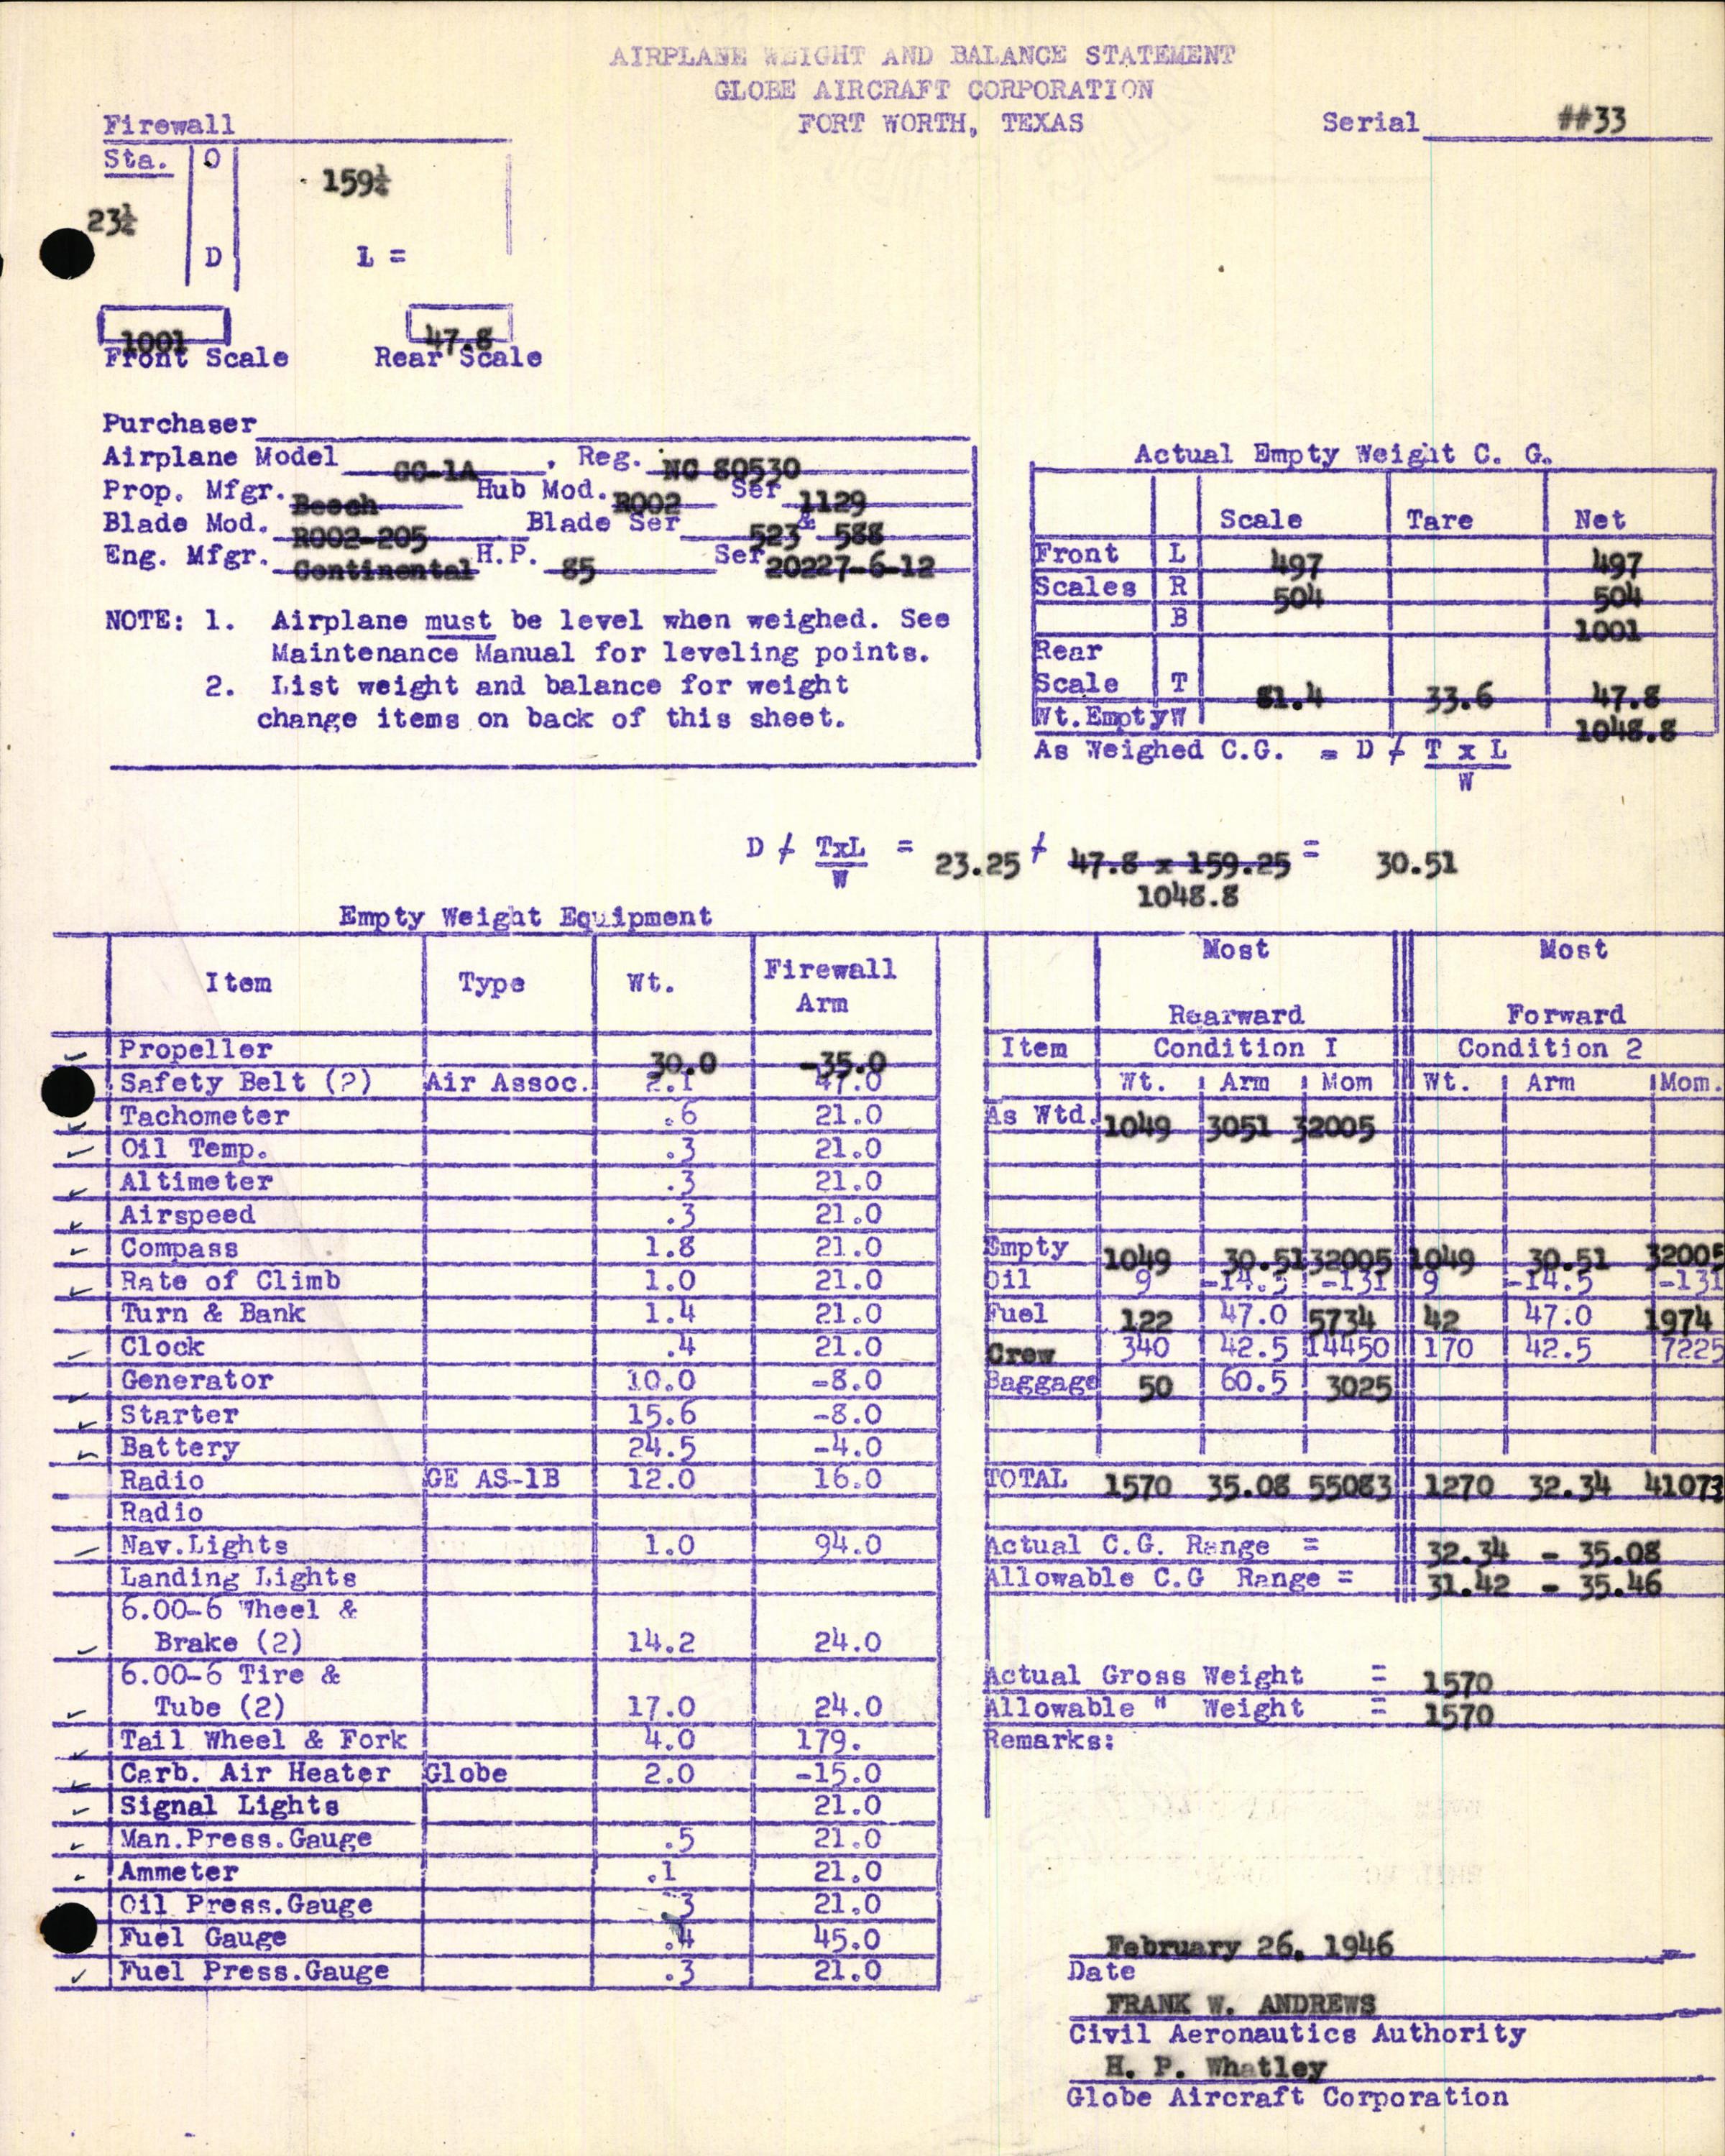 Sample page 7 from AirCorps Library document: Technical Information for Serial Number 33